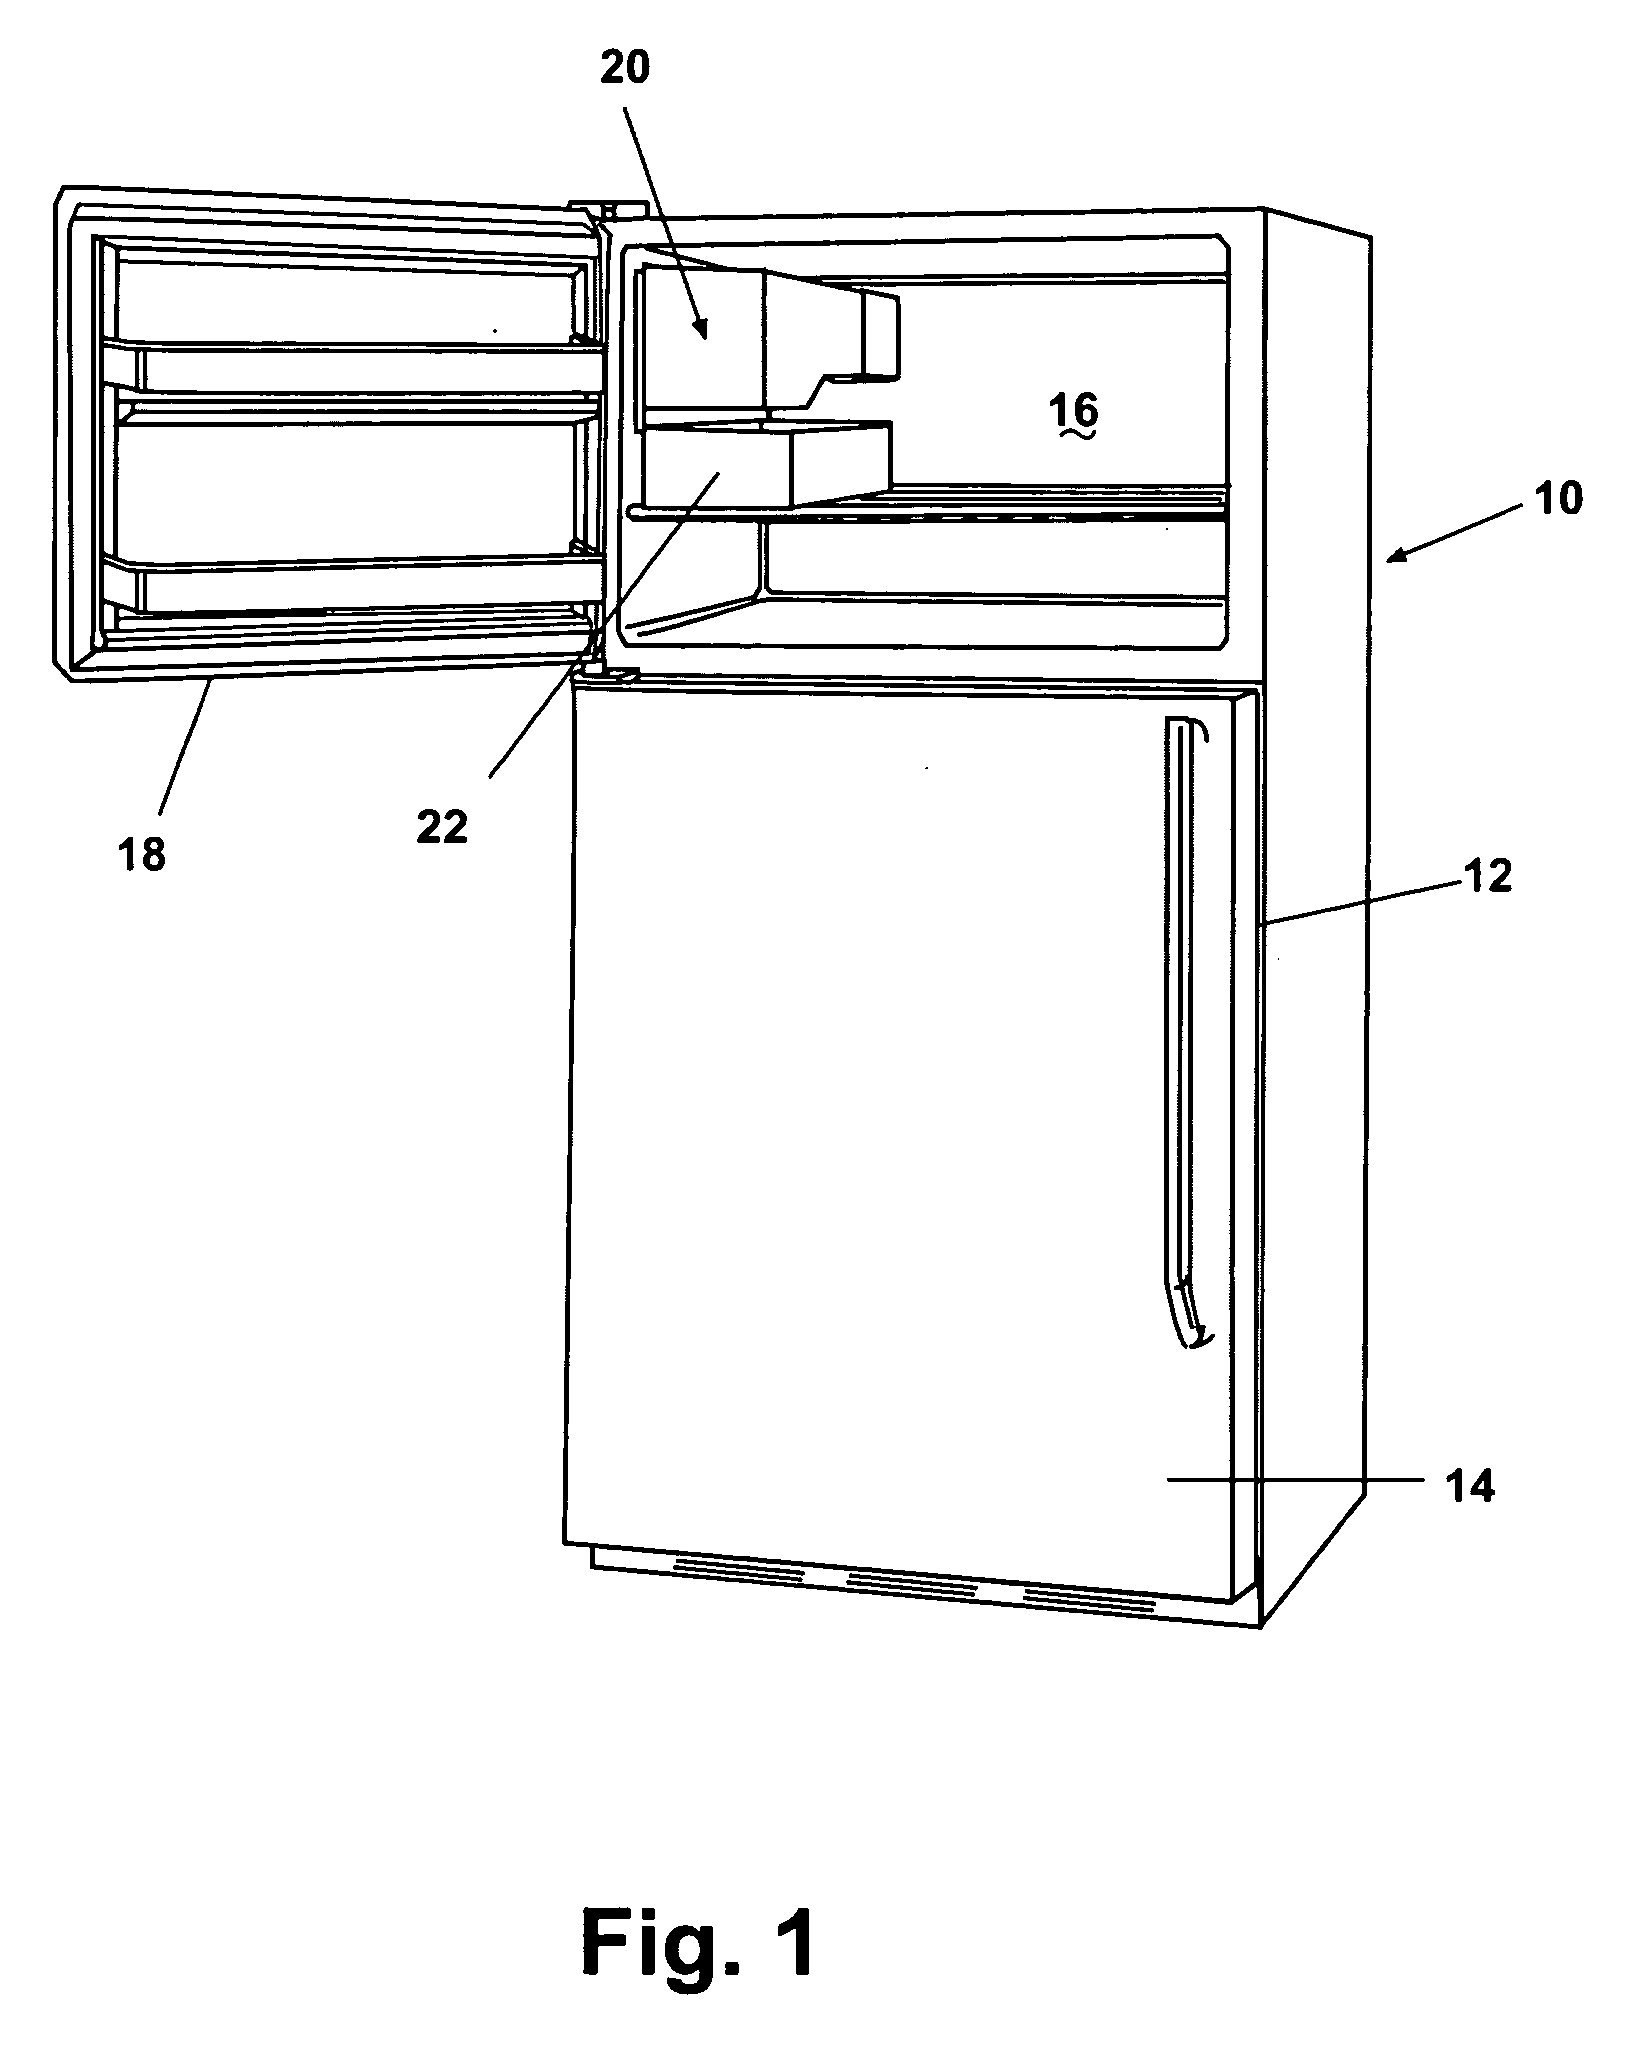 Refrigerator with compact icemaker